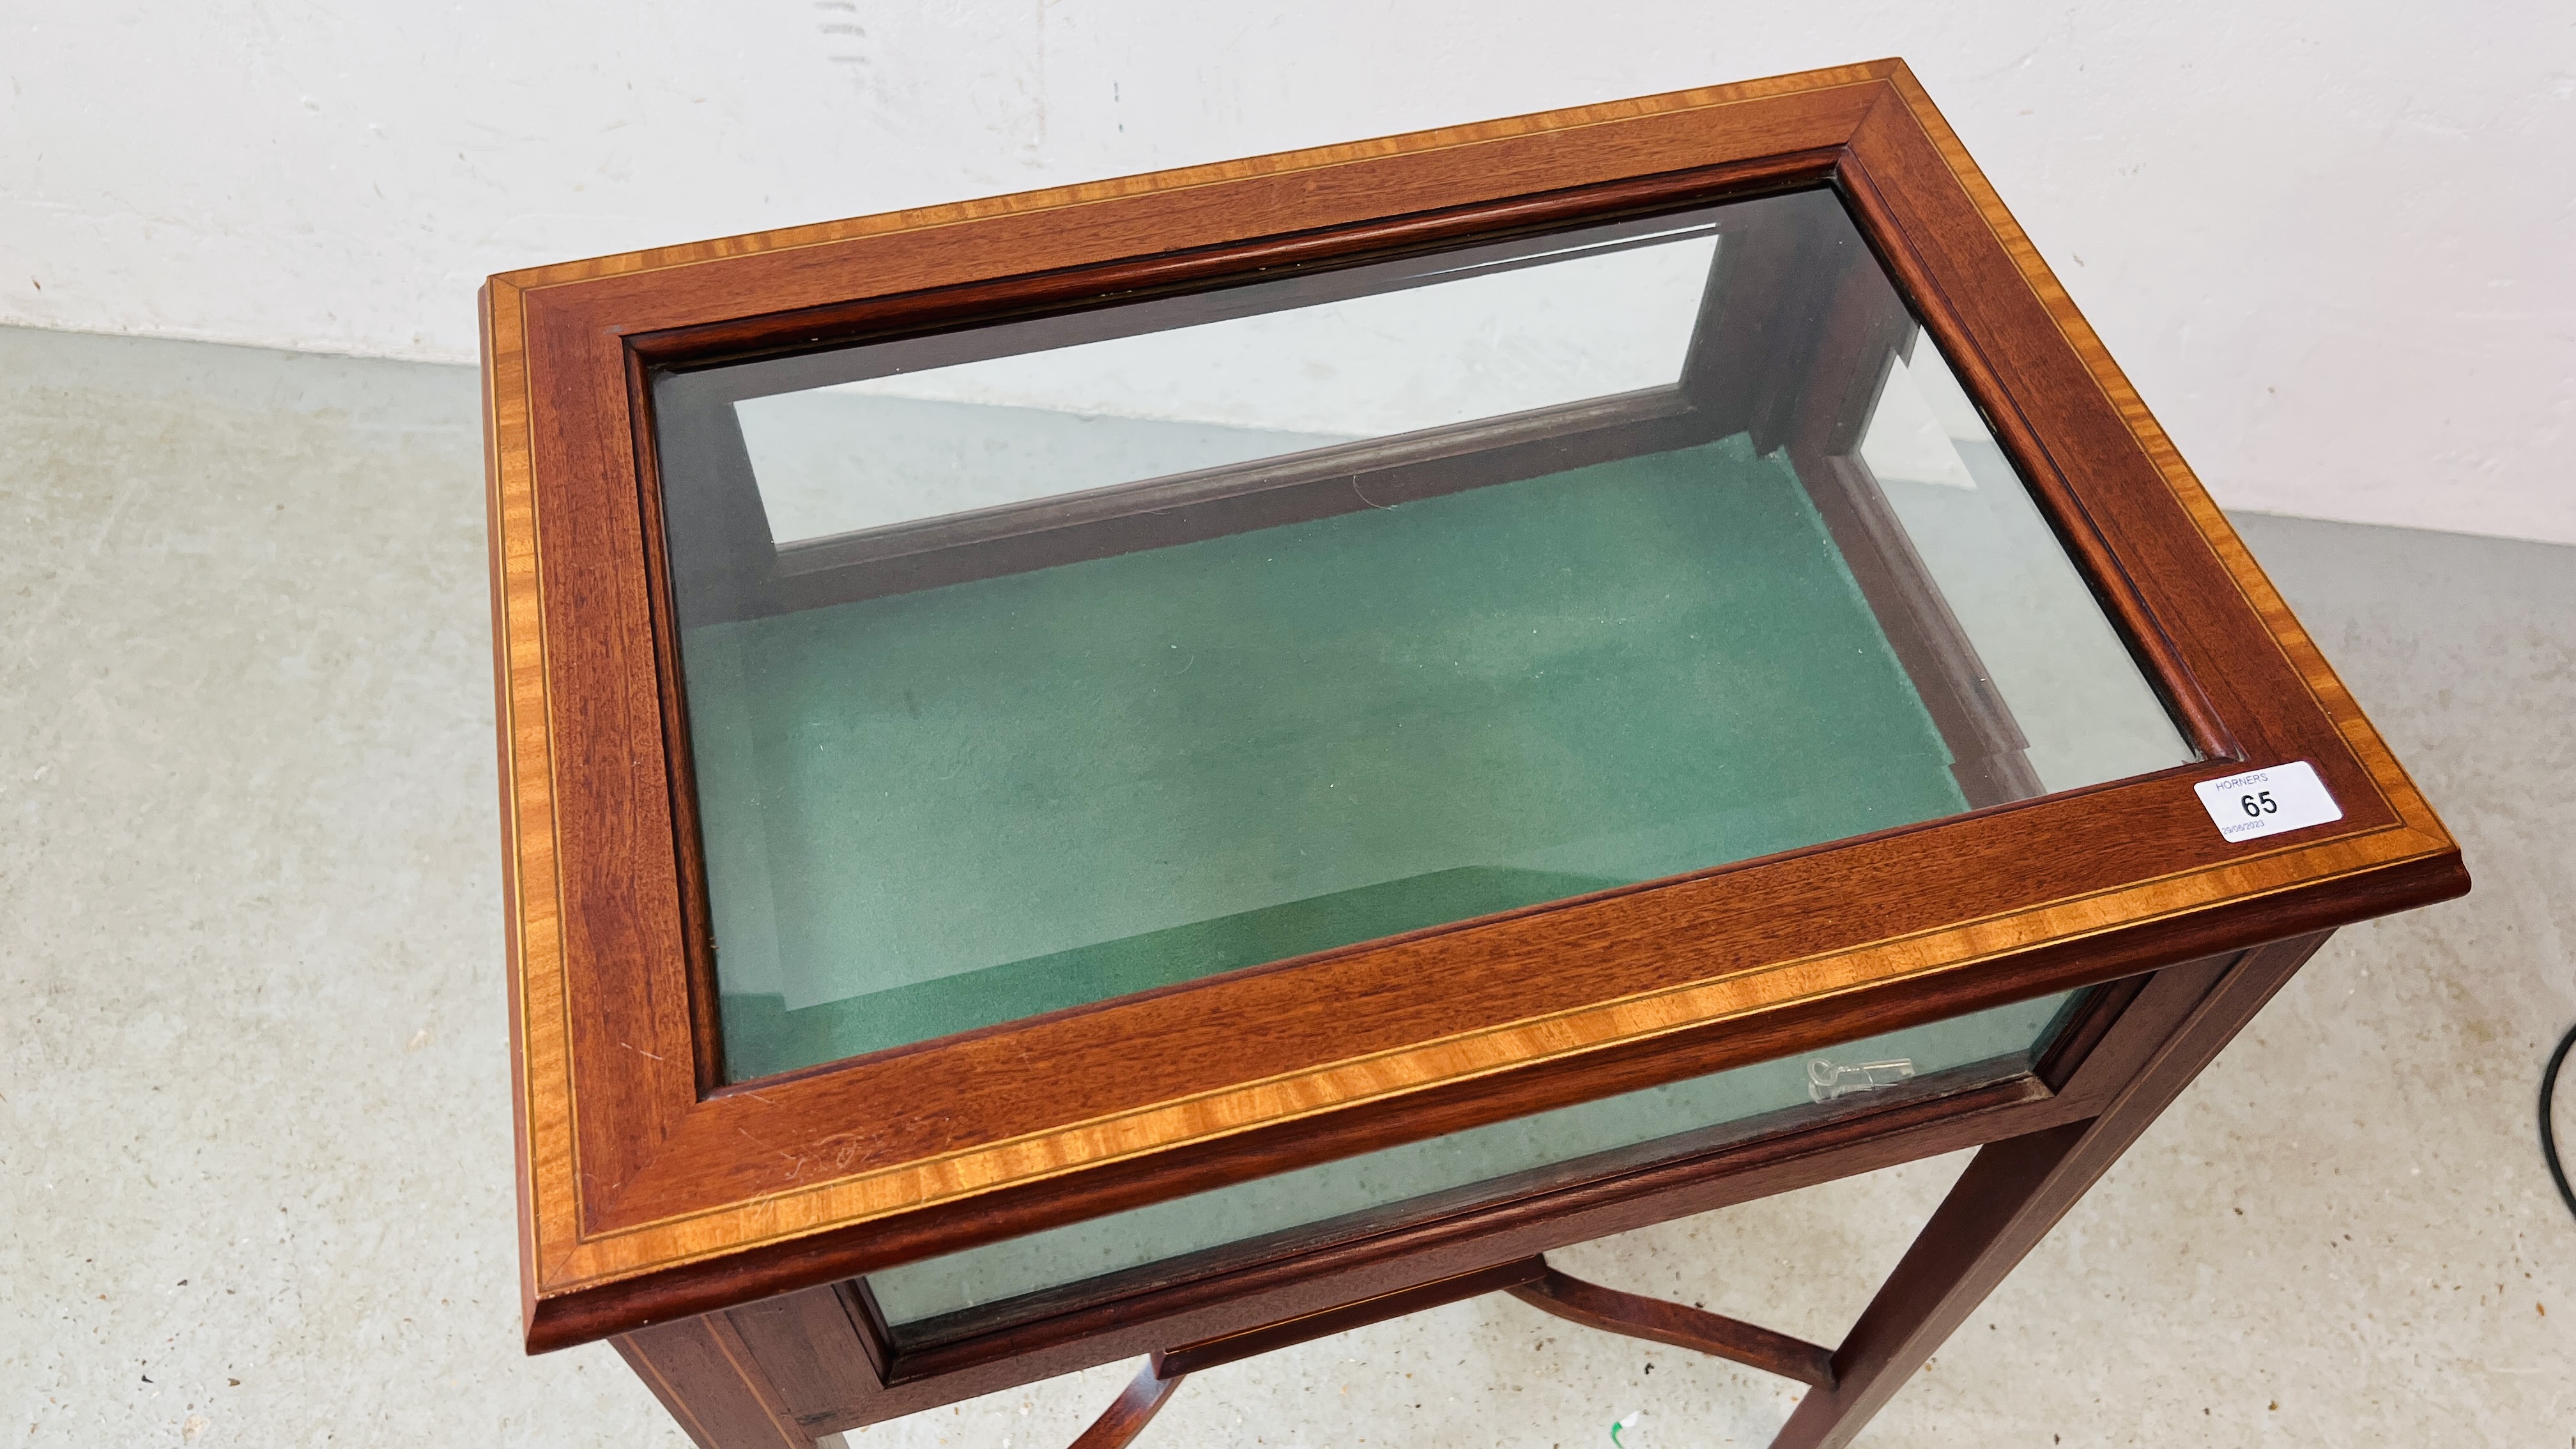 A MAHOGANY AND INLAID GLASS CASED FLOOR STANDING DISPLAY CASE W 57CM. H 76CM. D 40CM. - Image 3 of 11